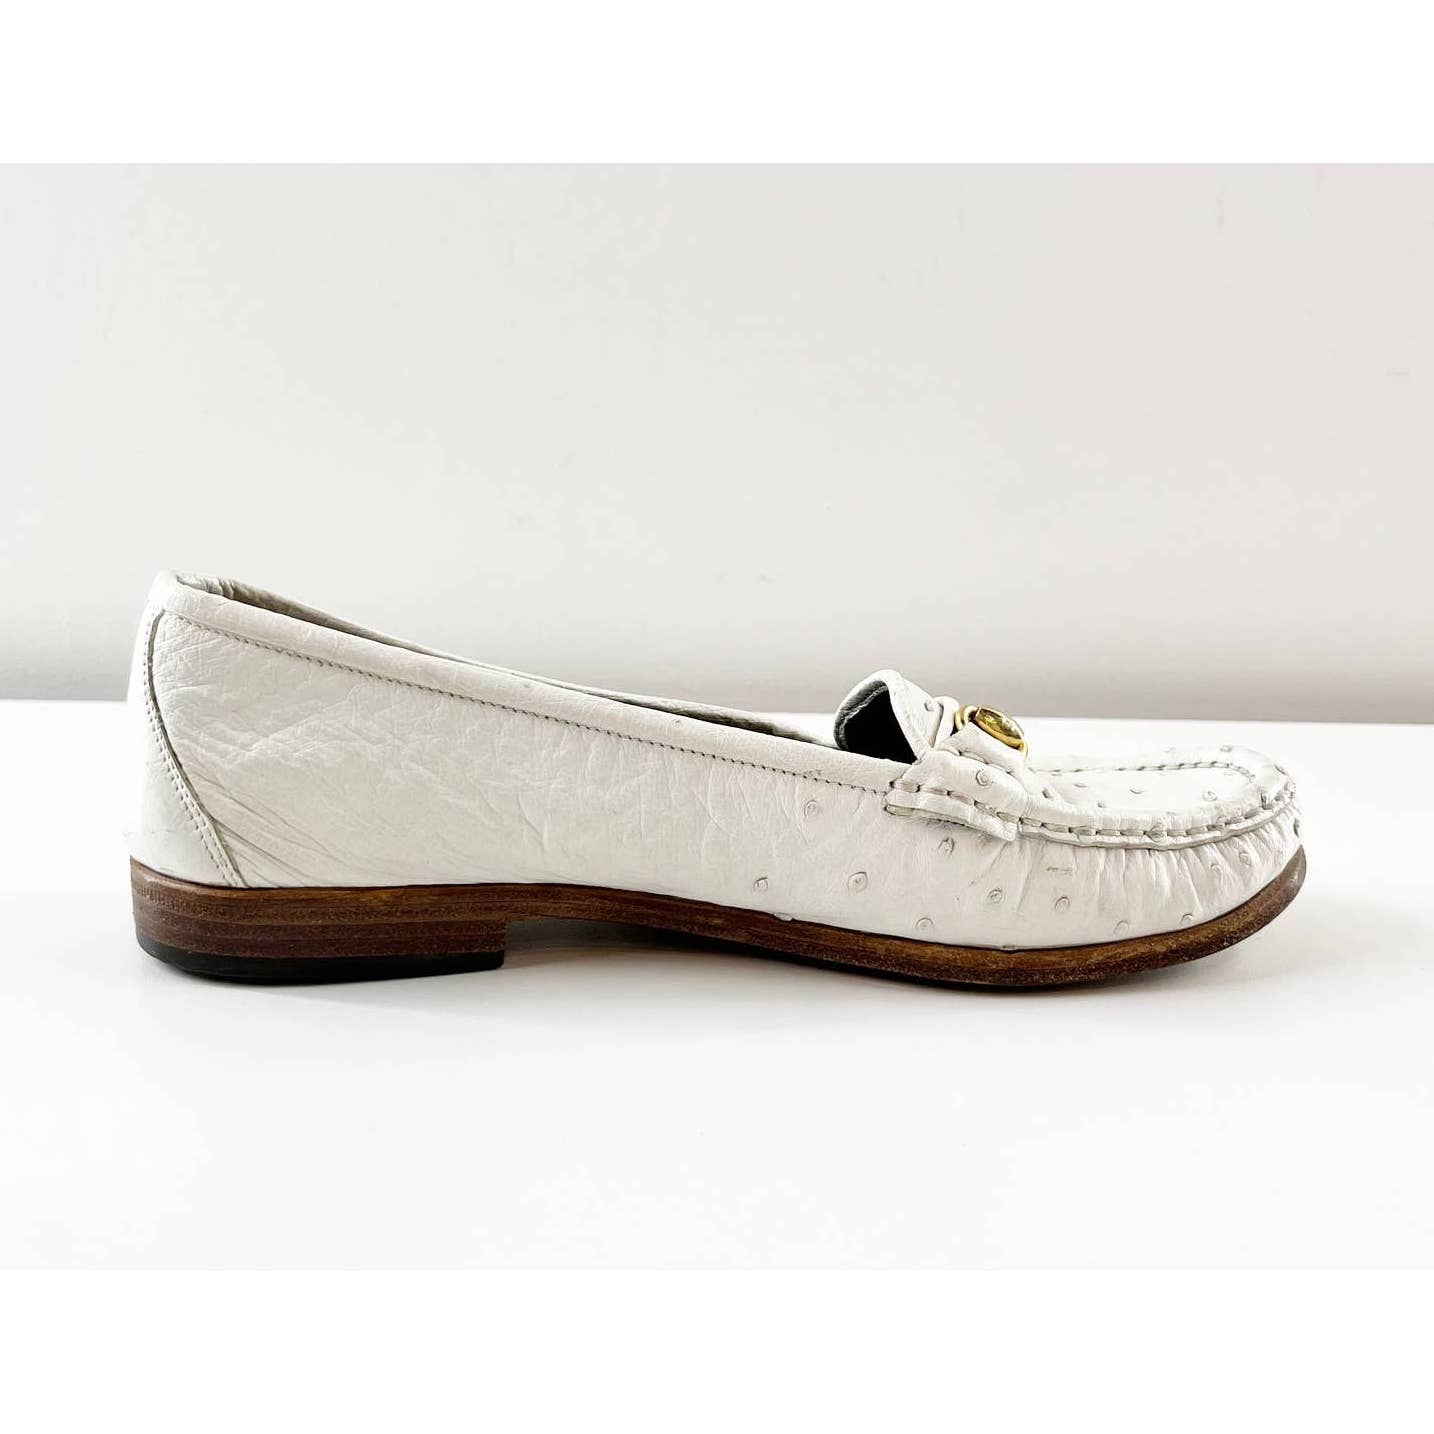 Gucci Vintage Horsebit Ostrich Leather Driving Loafers Flats White 36 / 6